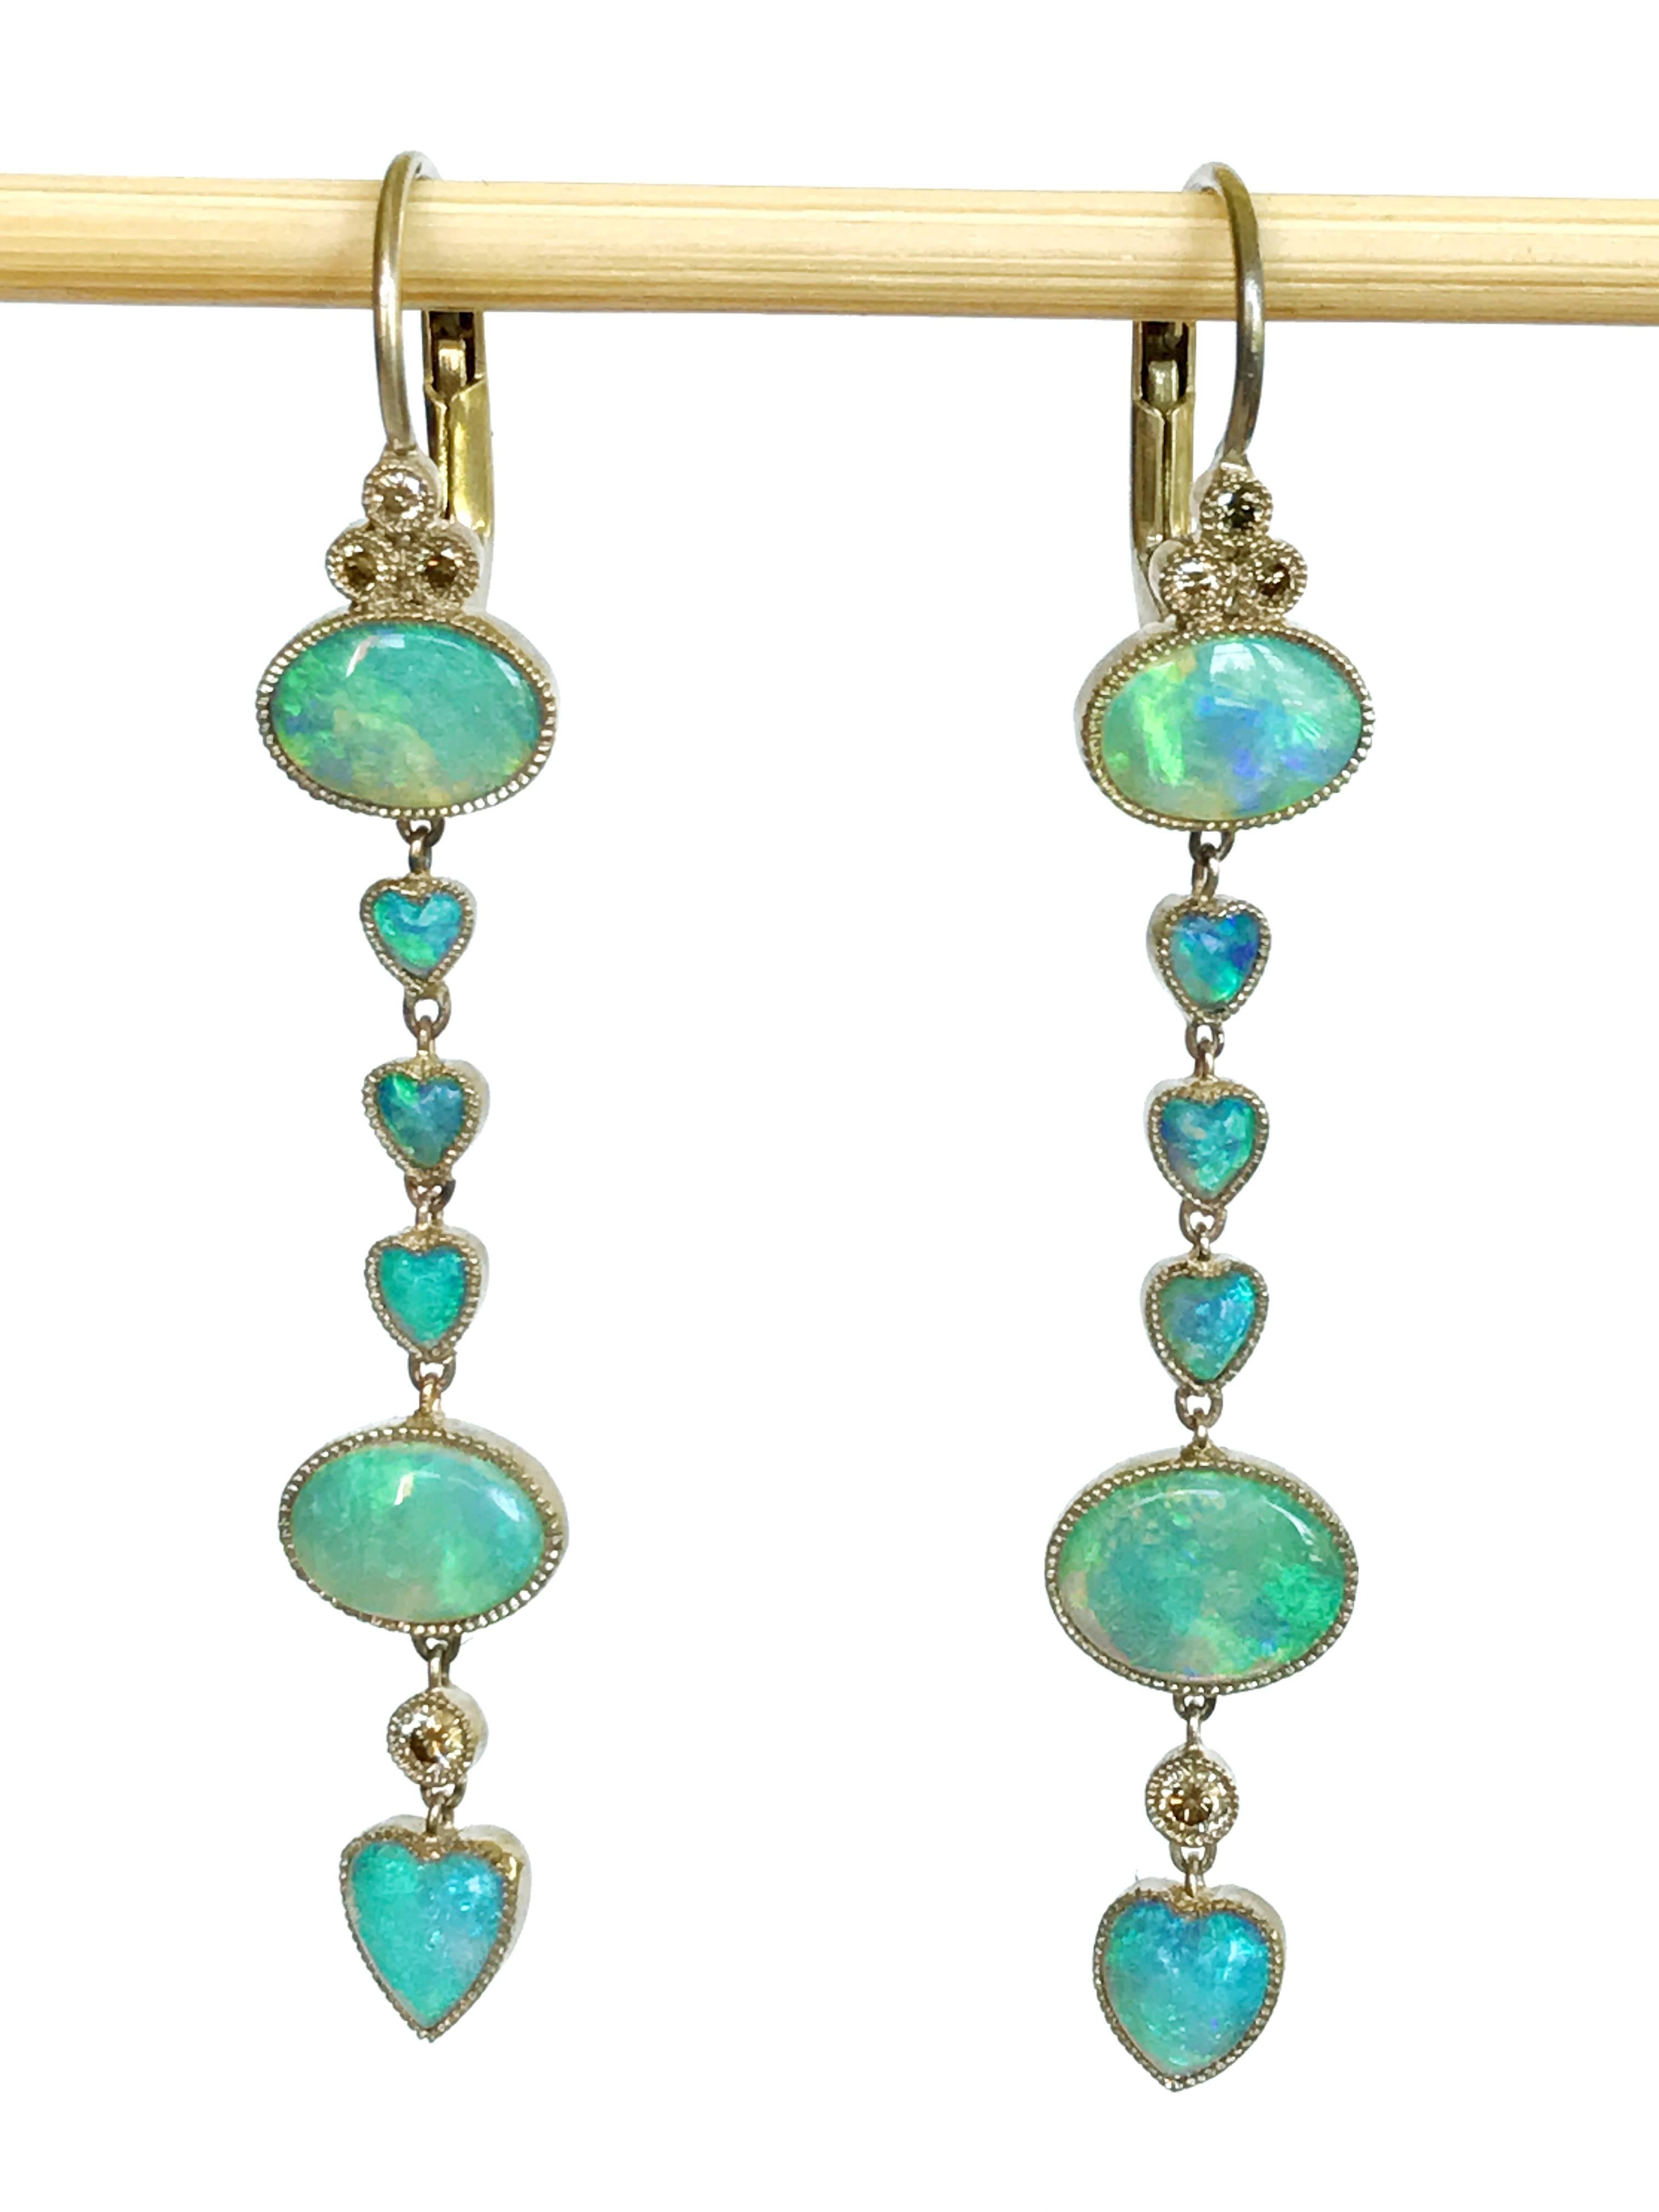 Dalben design Opal drop earrings with oval and heart shape green-azure Australian Opals and 12 brown round brillant cut Diamonds weighing 0,12 carats mounted in 18 kt warm white gold. 
Dimension: width 7,5 mm height without leverback 42 mm 
The